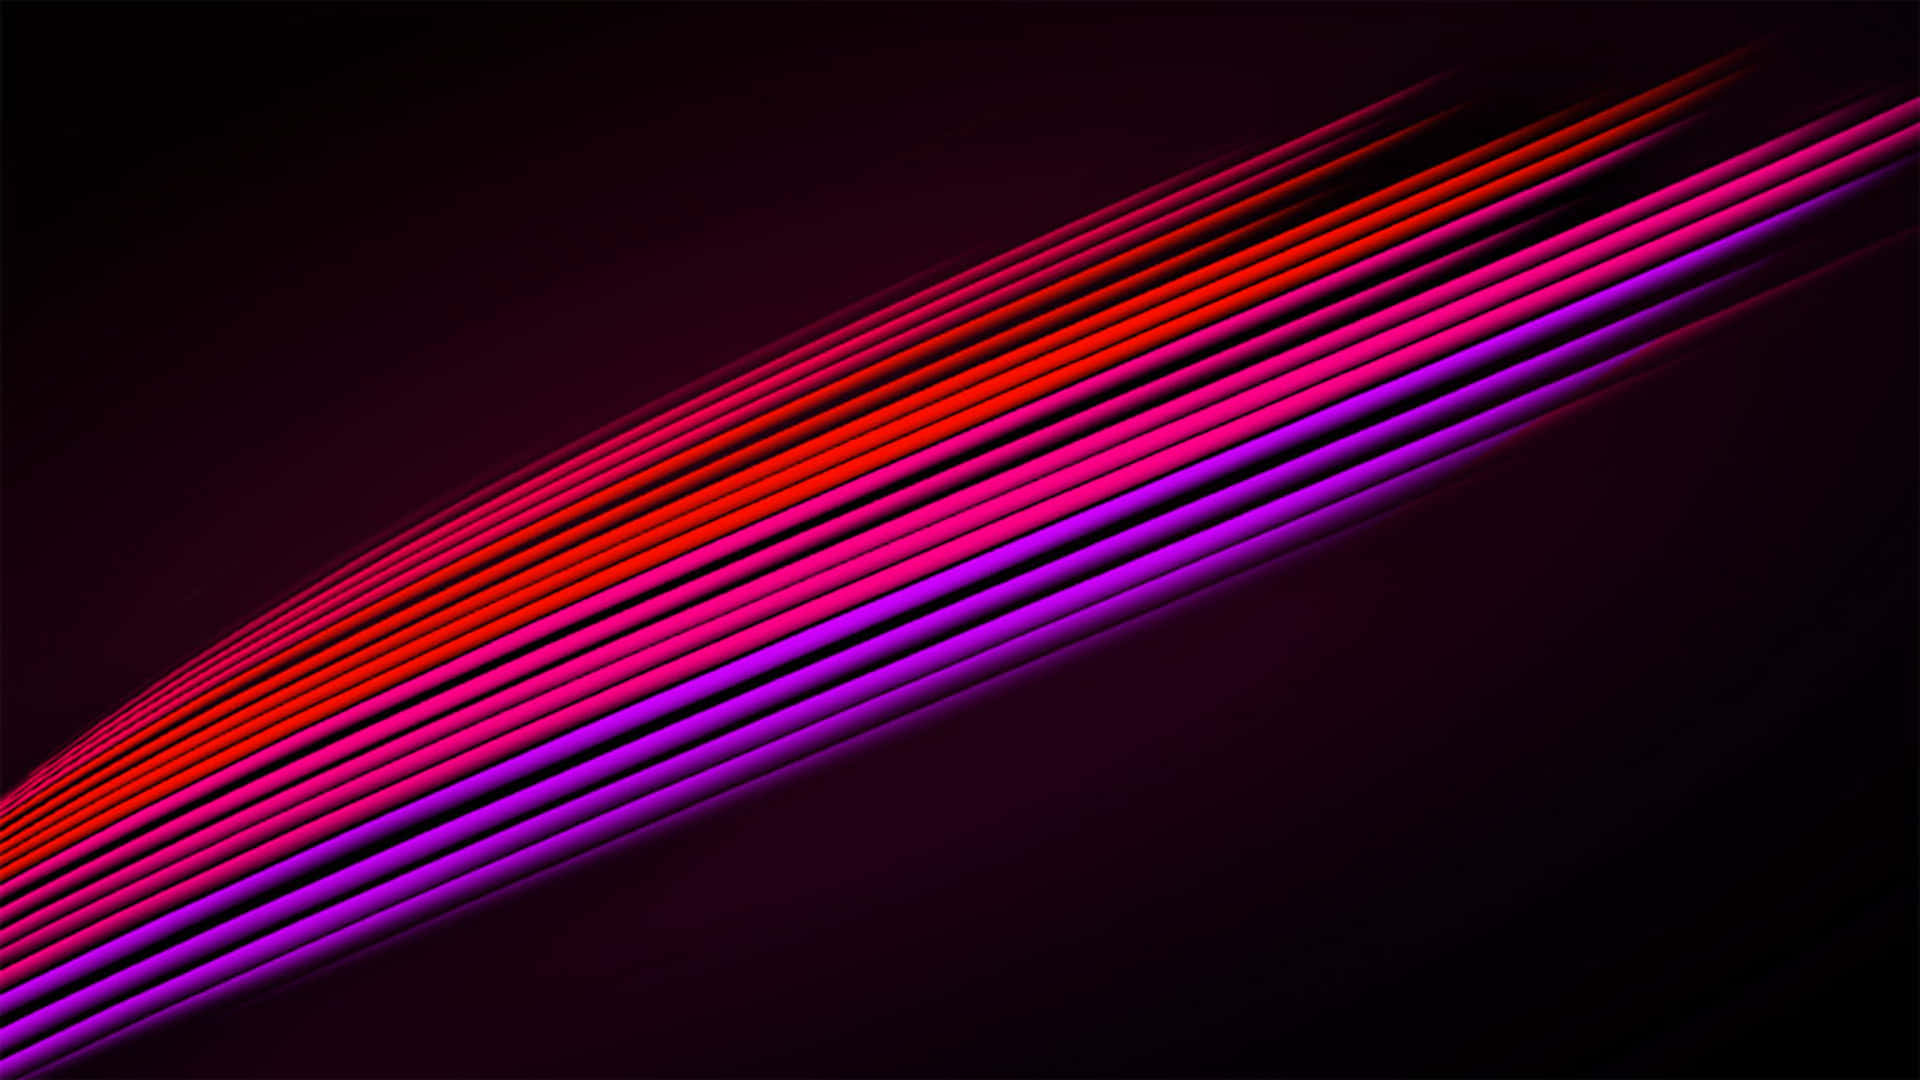 A Gorgeous Amoled Wallpaper in 1080p Wallpaper